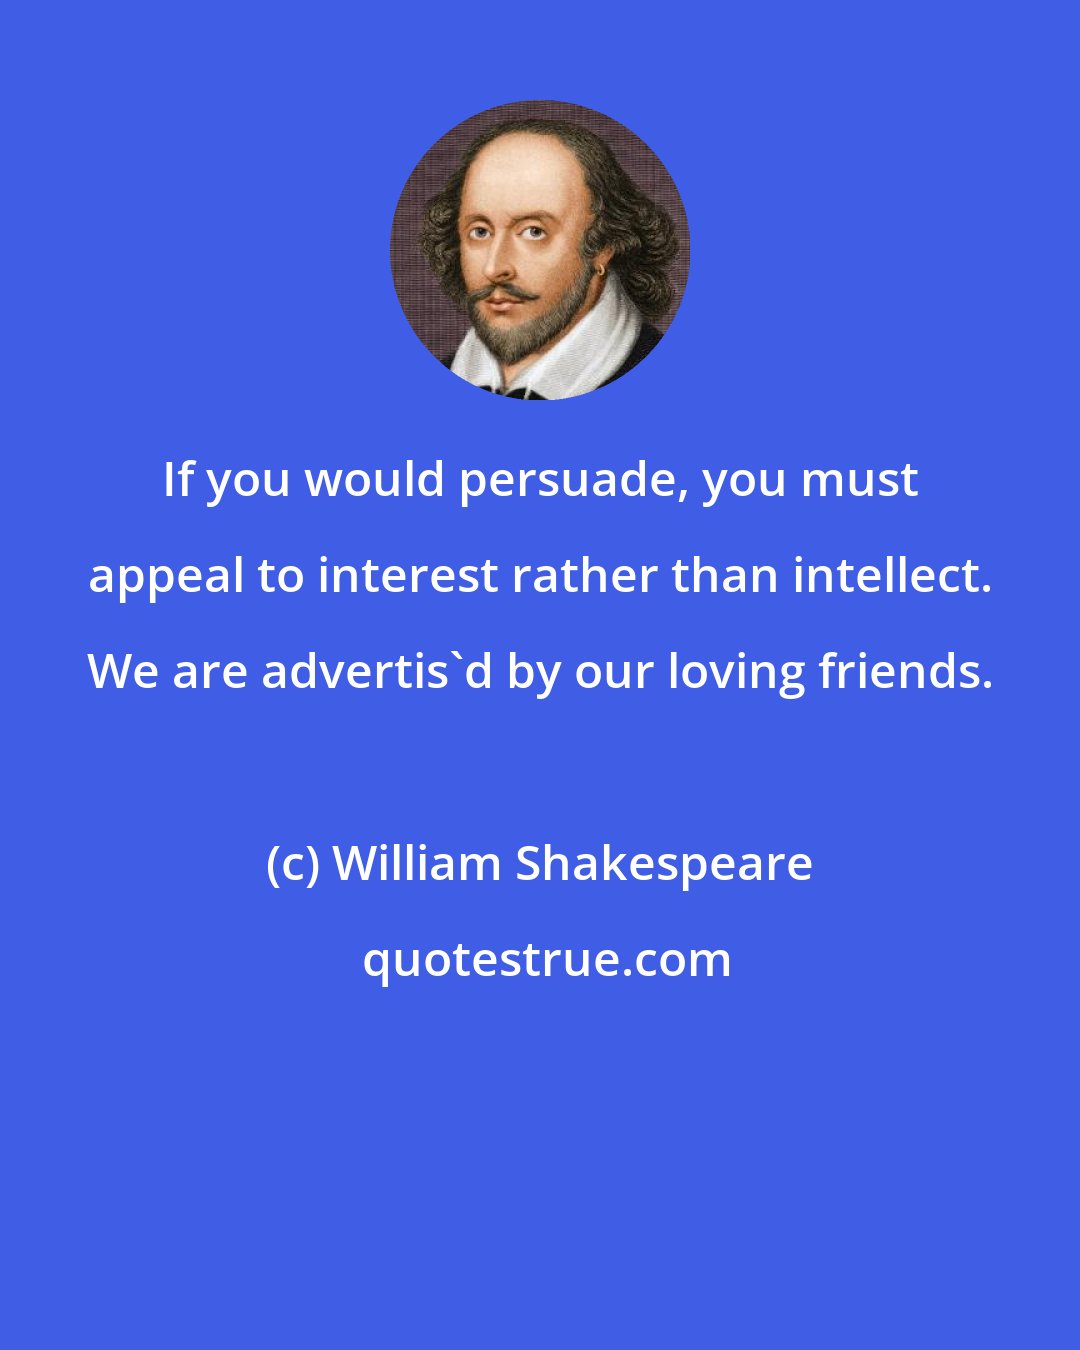 William Shakespeare: If you would persuade, you must appeal to interest rather than intellect. We are advertis'd by our loving friends.